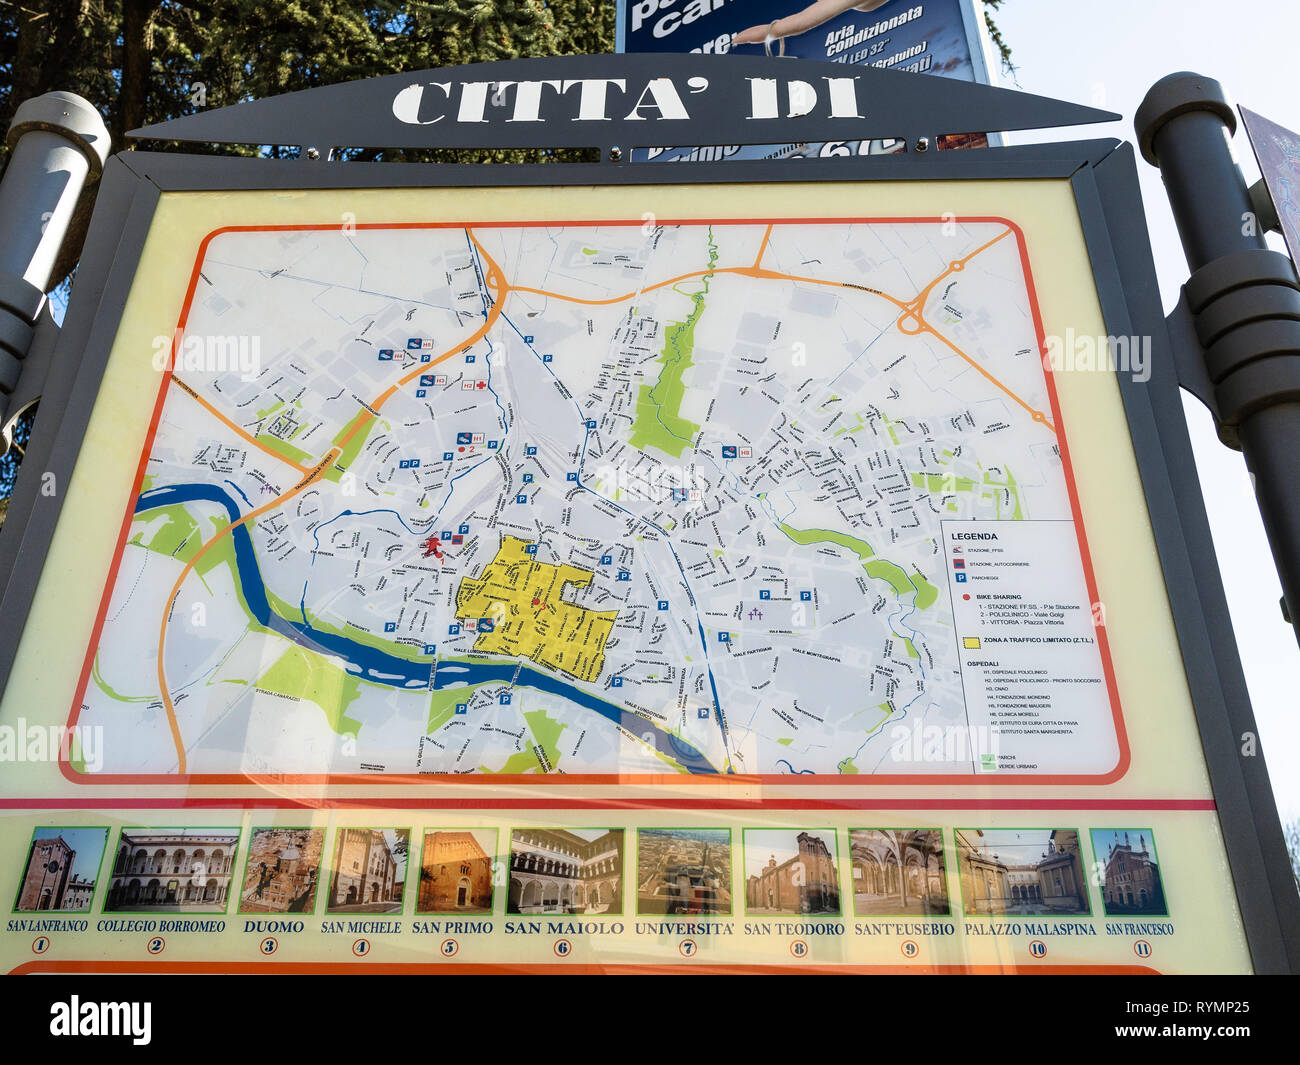 PAVIA, ITALY - FEBRUARY 22, 2019: outdoor city map with pictures of landmarks on street of Pavia. Pavia is town in Lombardy, the city was the capital  Stock Photo